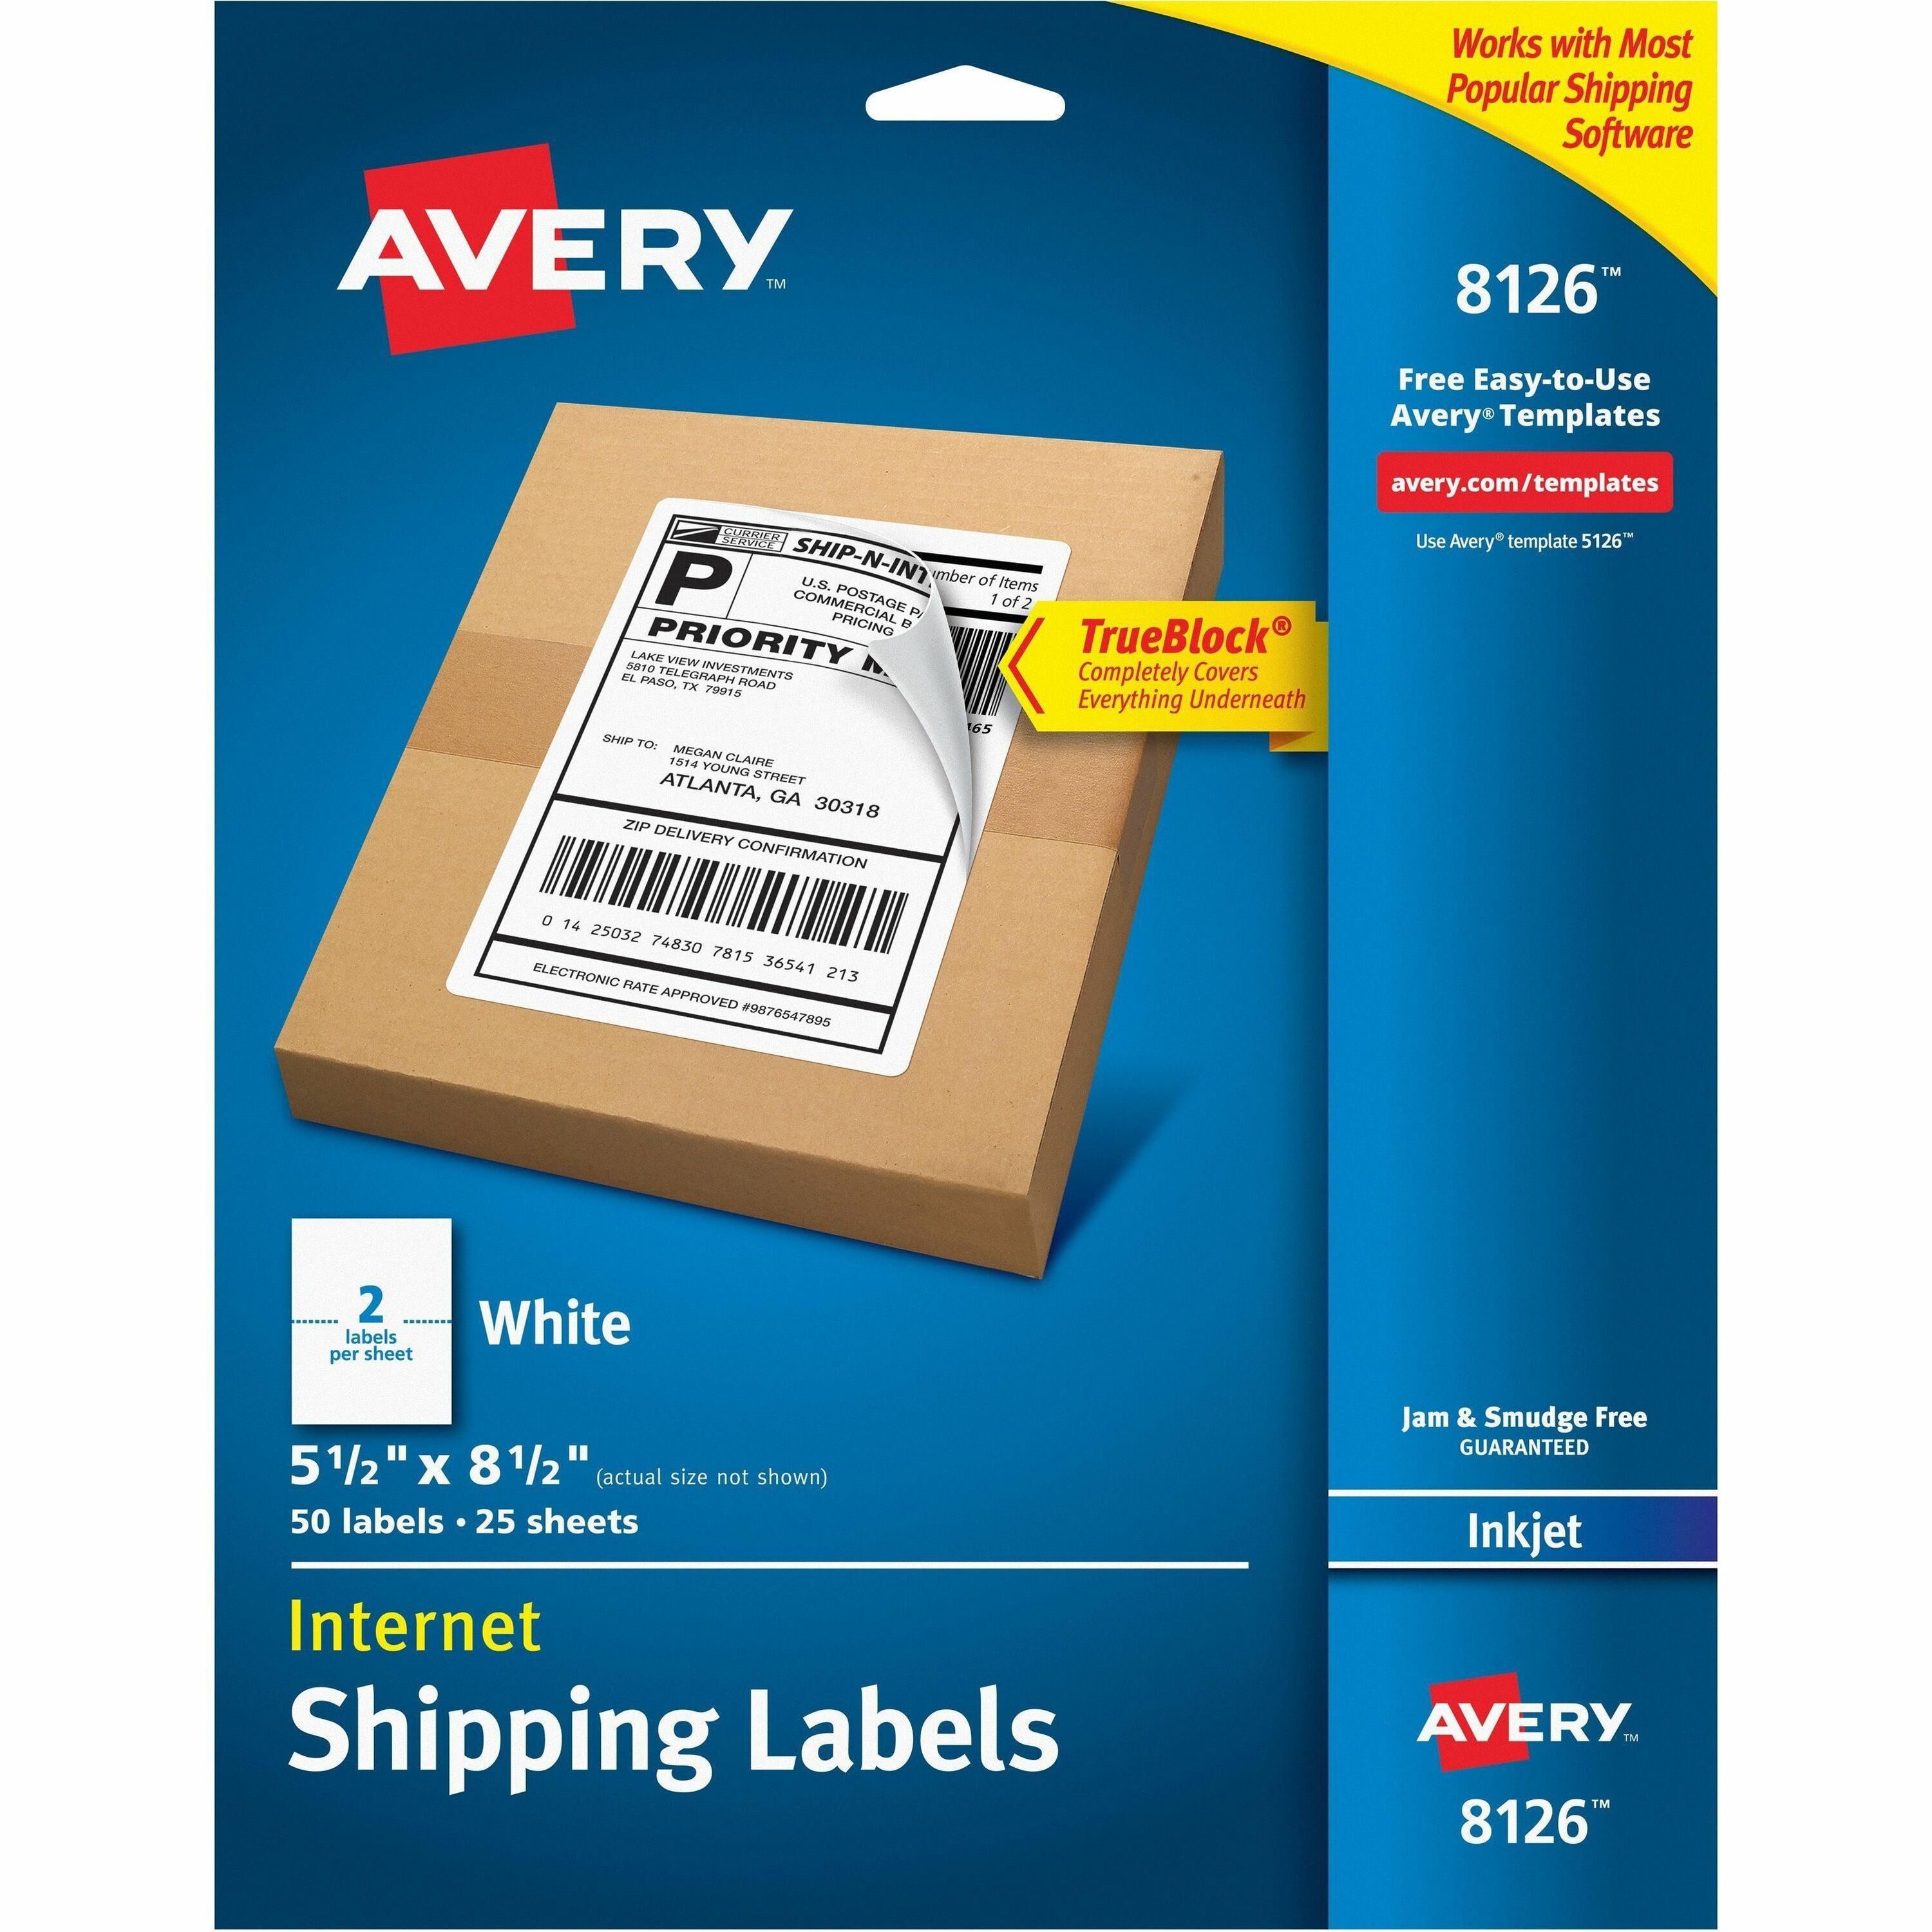 ocean-stationery-and-office-supplies-office-supplies-labels-labeling-systems-labels